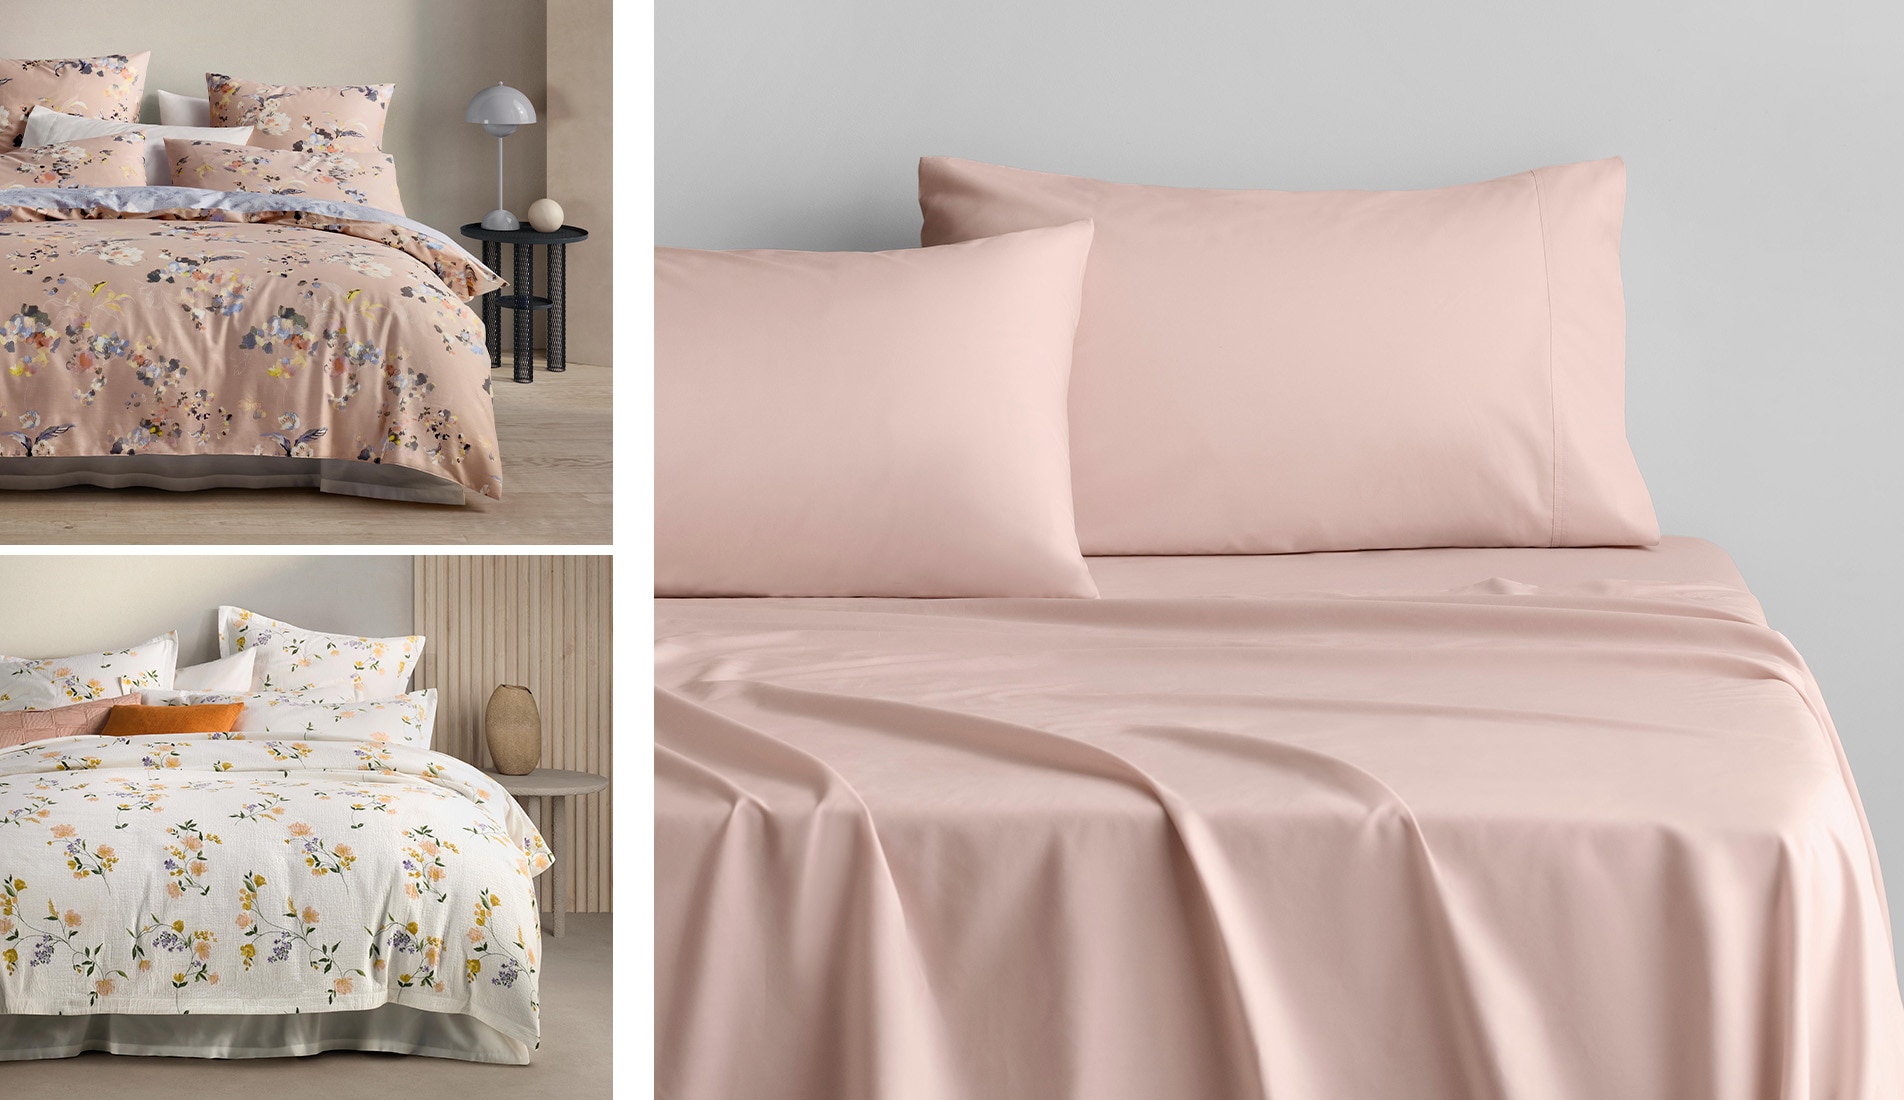 split image. left hand side, split into two beds. pink floral bed on top, white floral bed on bottom. right hand side larger image, byren percale tencel lyocell sheet in colour lychee, styled on bed.